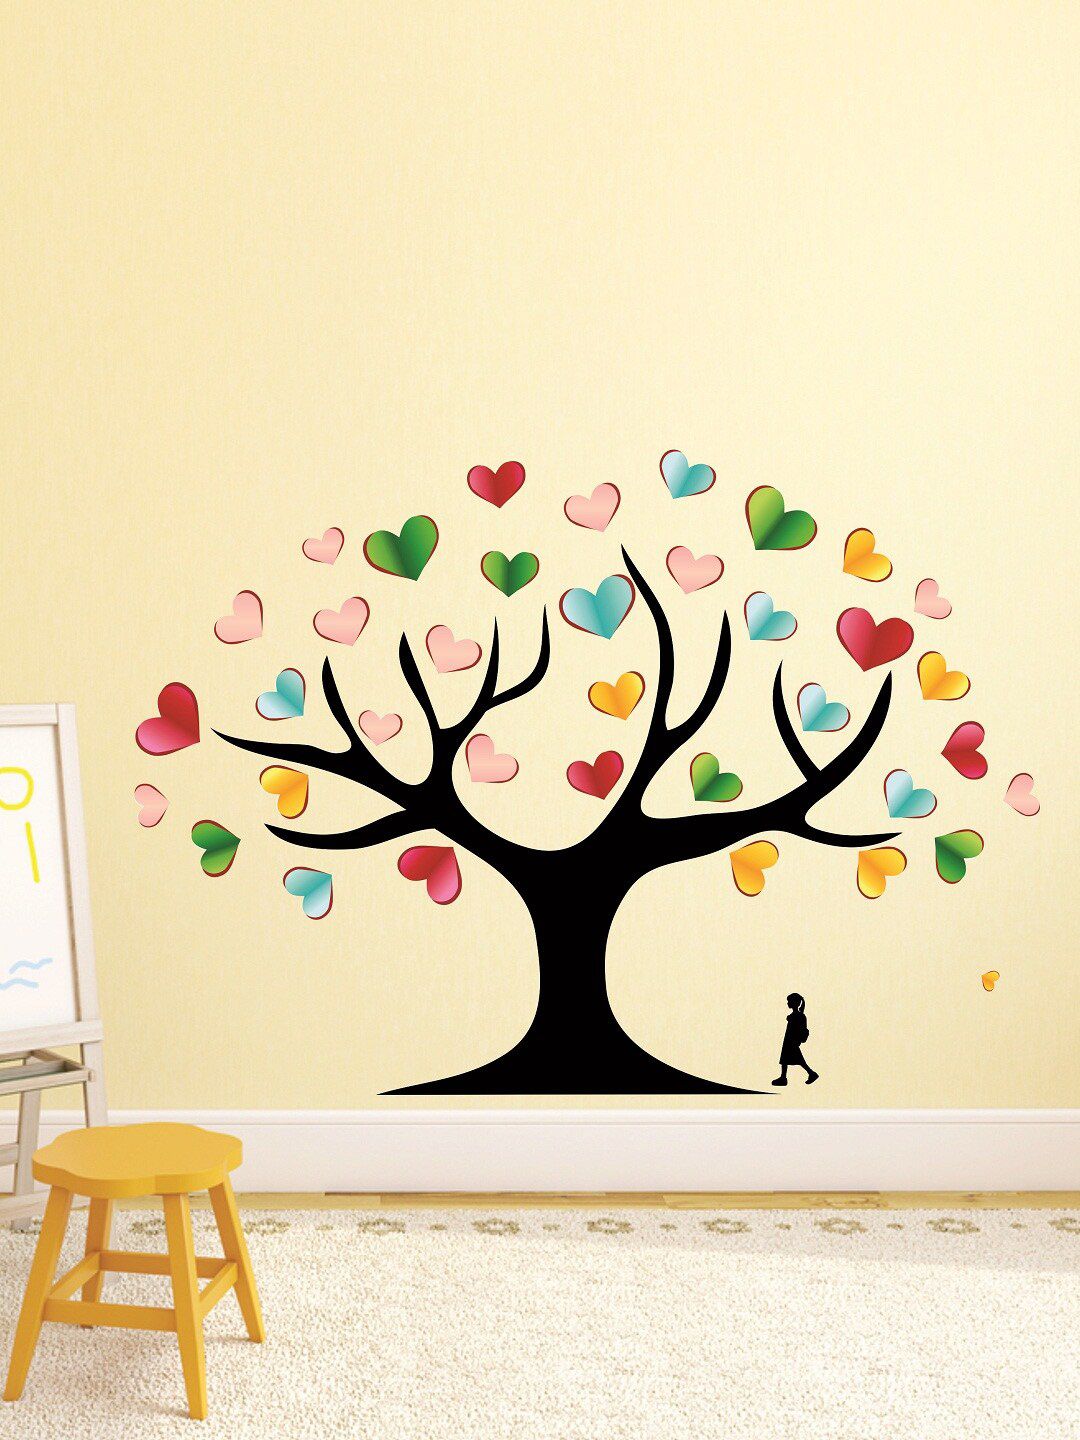 WALLSTICK Black & Blue Colourful Hearts Large Vinyl Wall Sticker Price in India